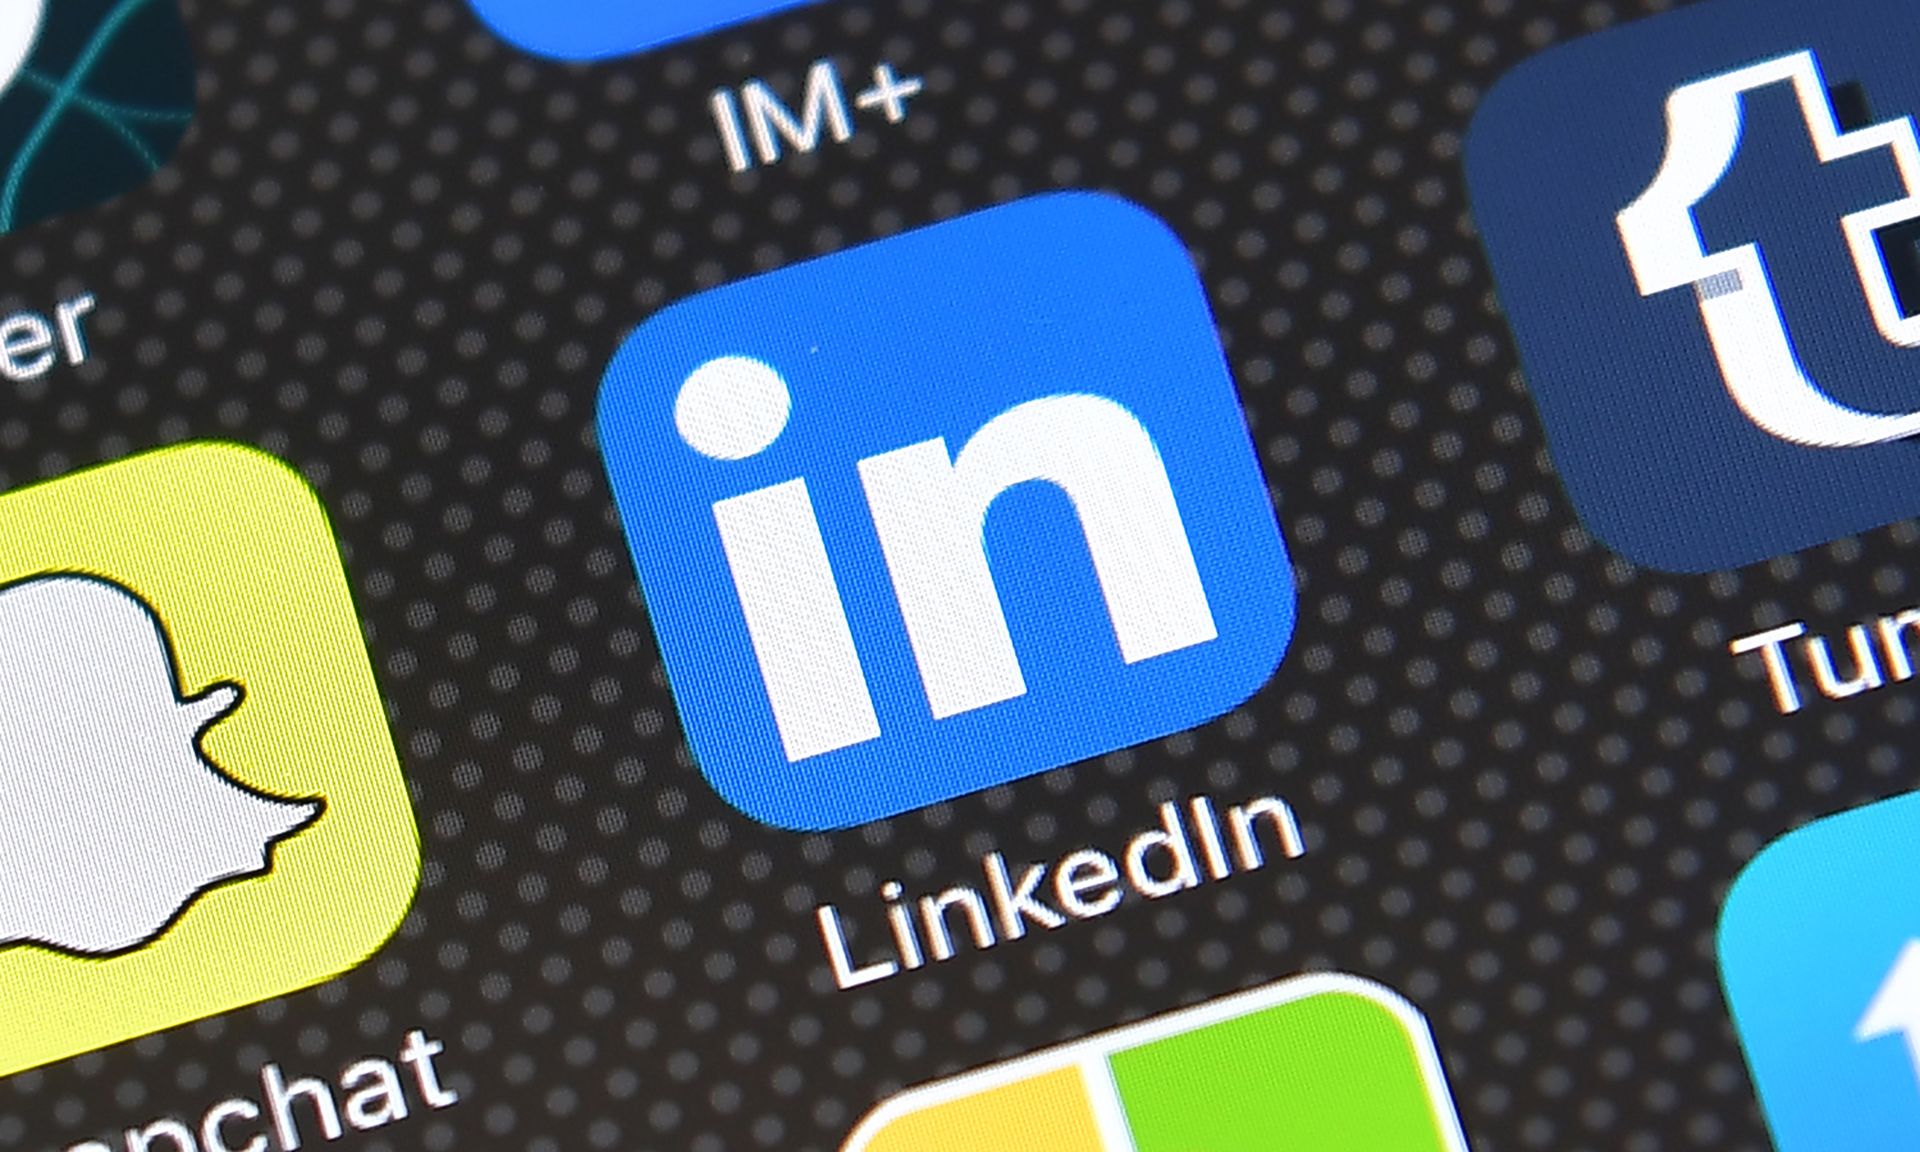 The LinkedIn app logo is displayed on an iPhone on Aug. 3, 2016, in London. (Photo by Carl Court/Getty Images)